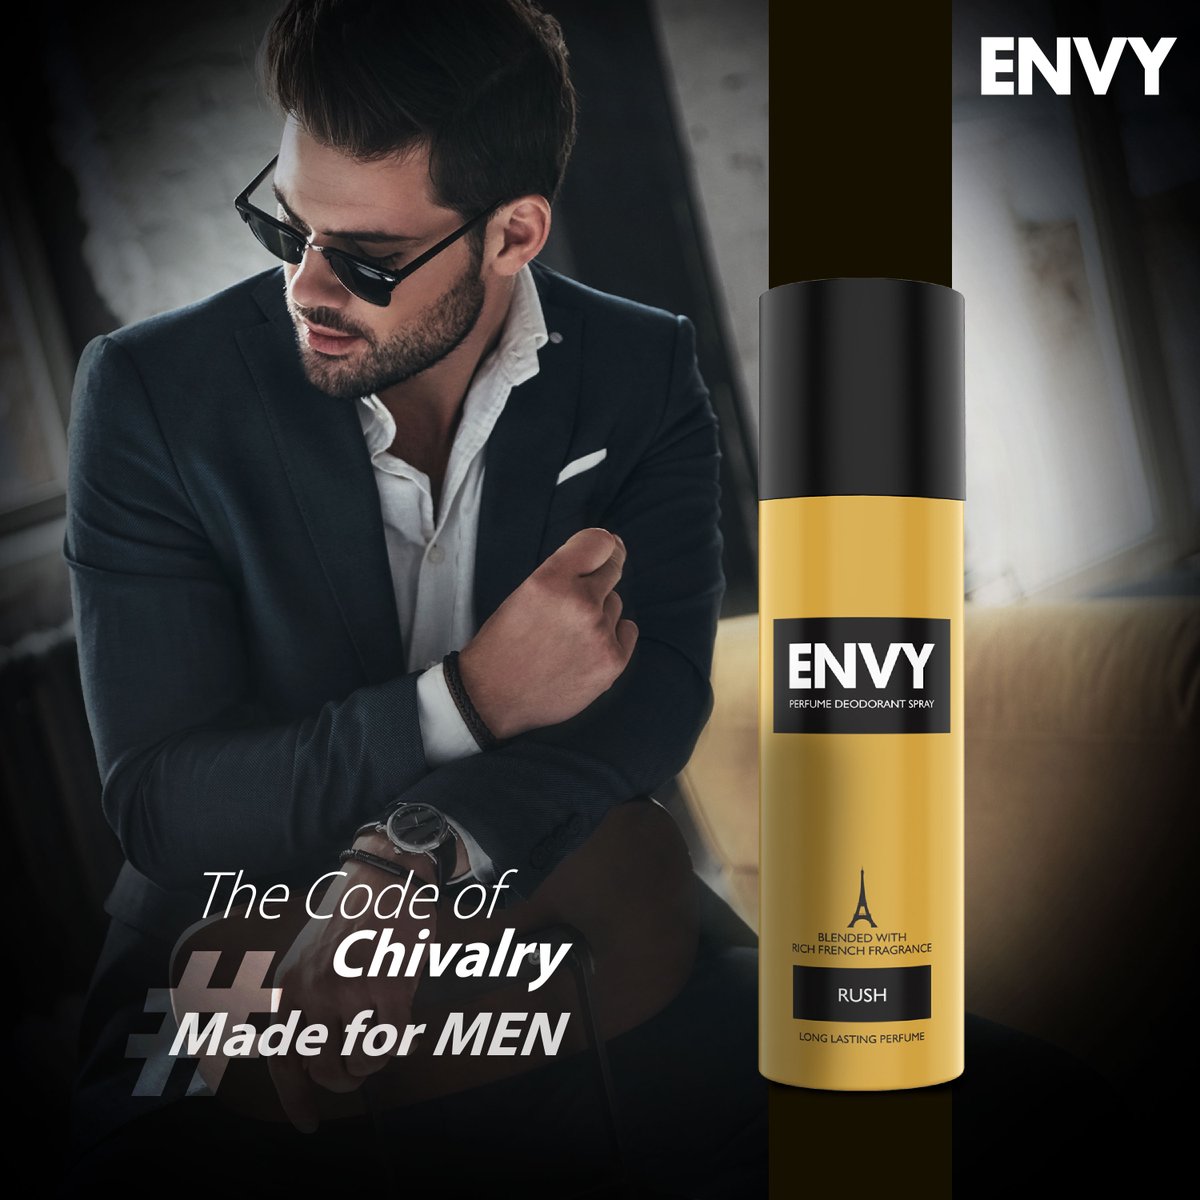 Emanate the fragrance of chivalry. Wear 'Envy' and become a modern-day knight, in a world yearning for a touch of timeless virtue. . . Get Your Envy: envyfragrances.com . . #madeformen #envyfrench #frenchperfume #perfumes #masculinefragrance #menstyling #fashion